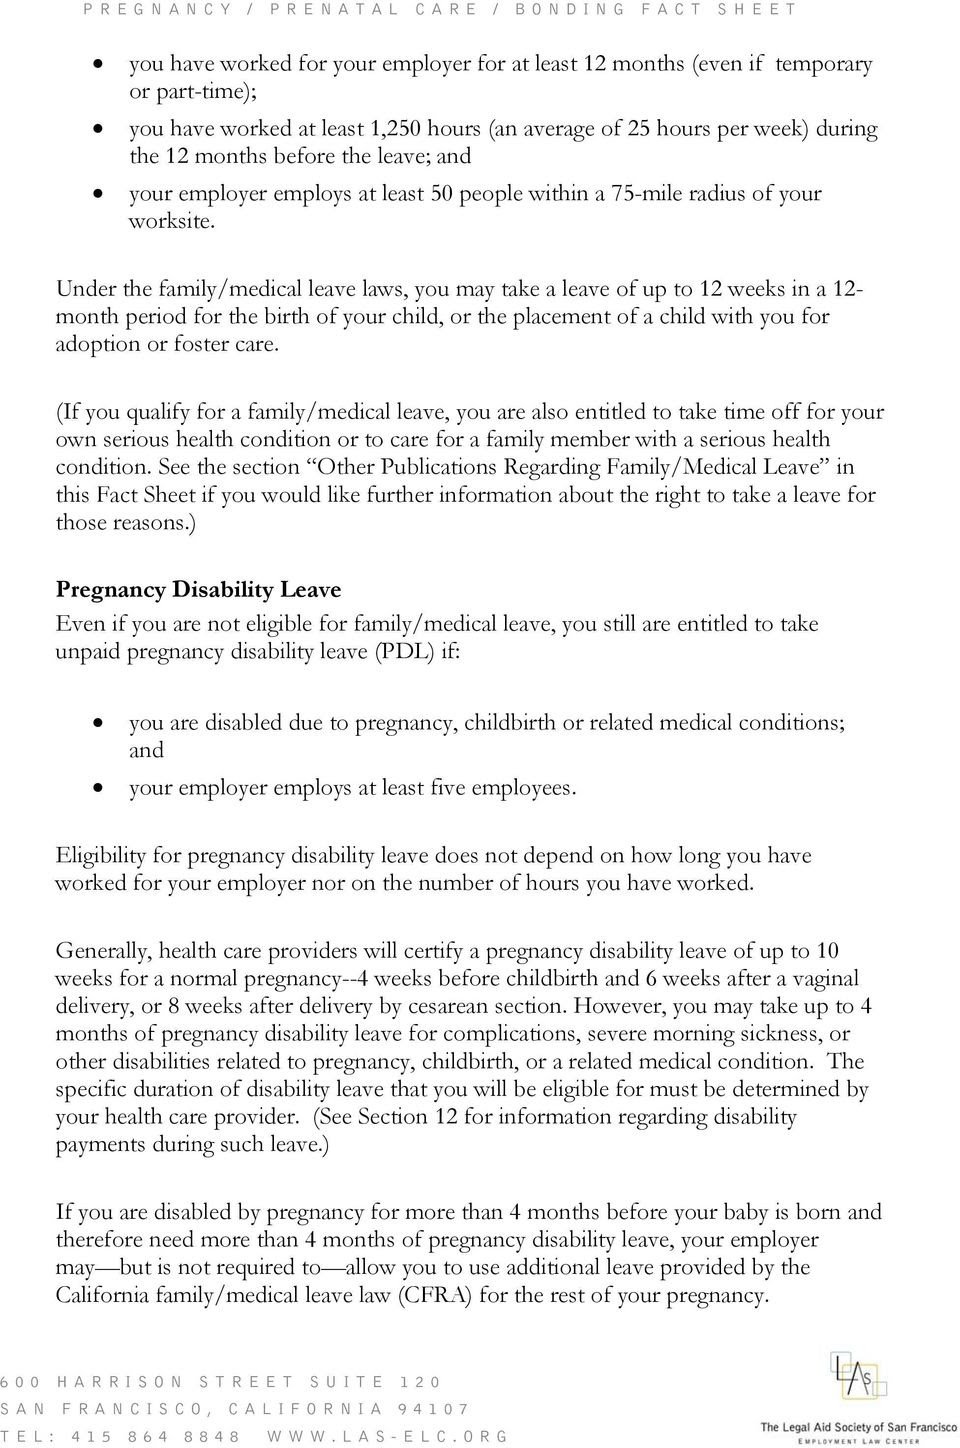 How To Apply For Pregnancy Disability Leave